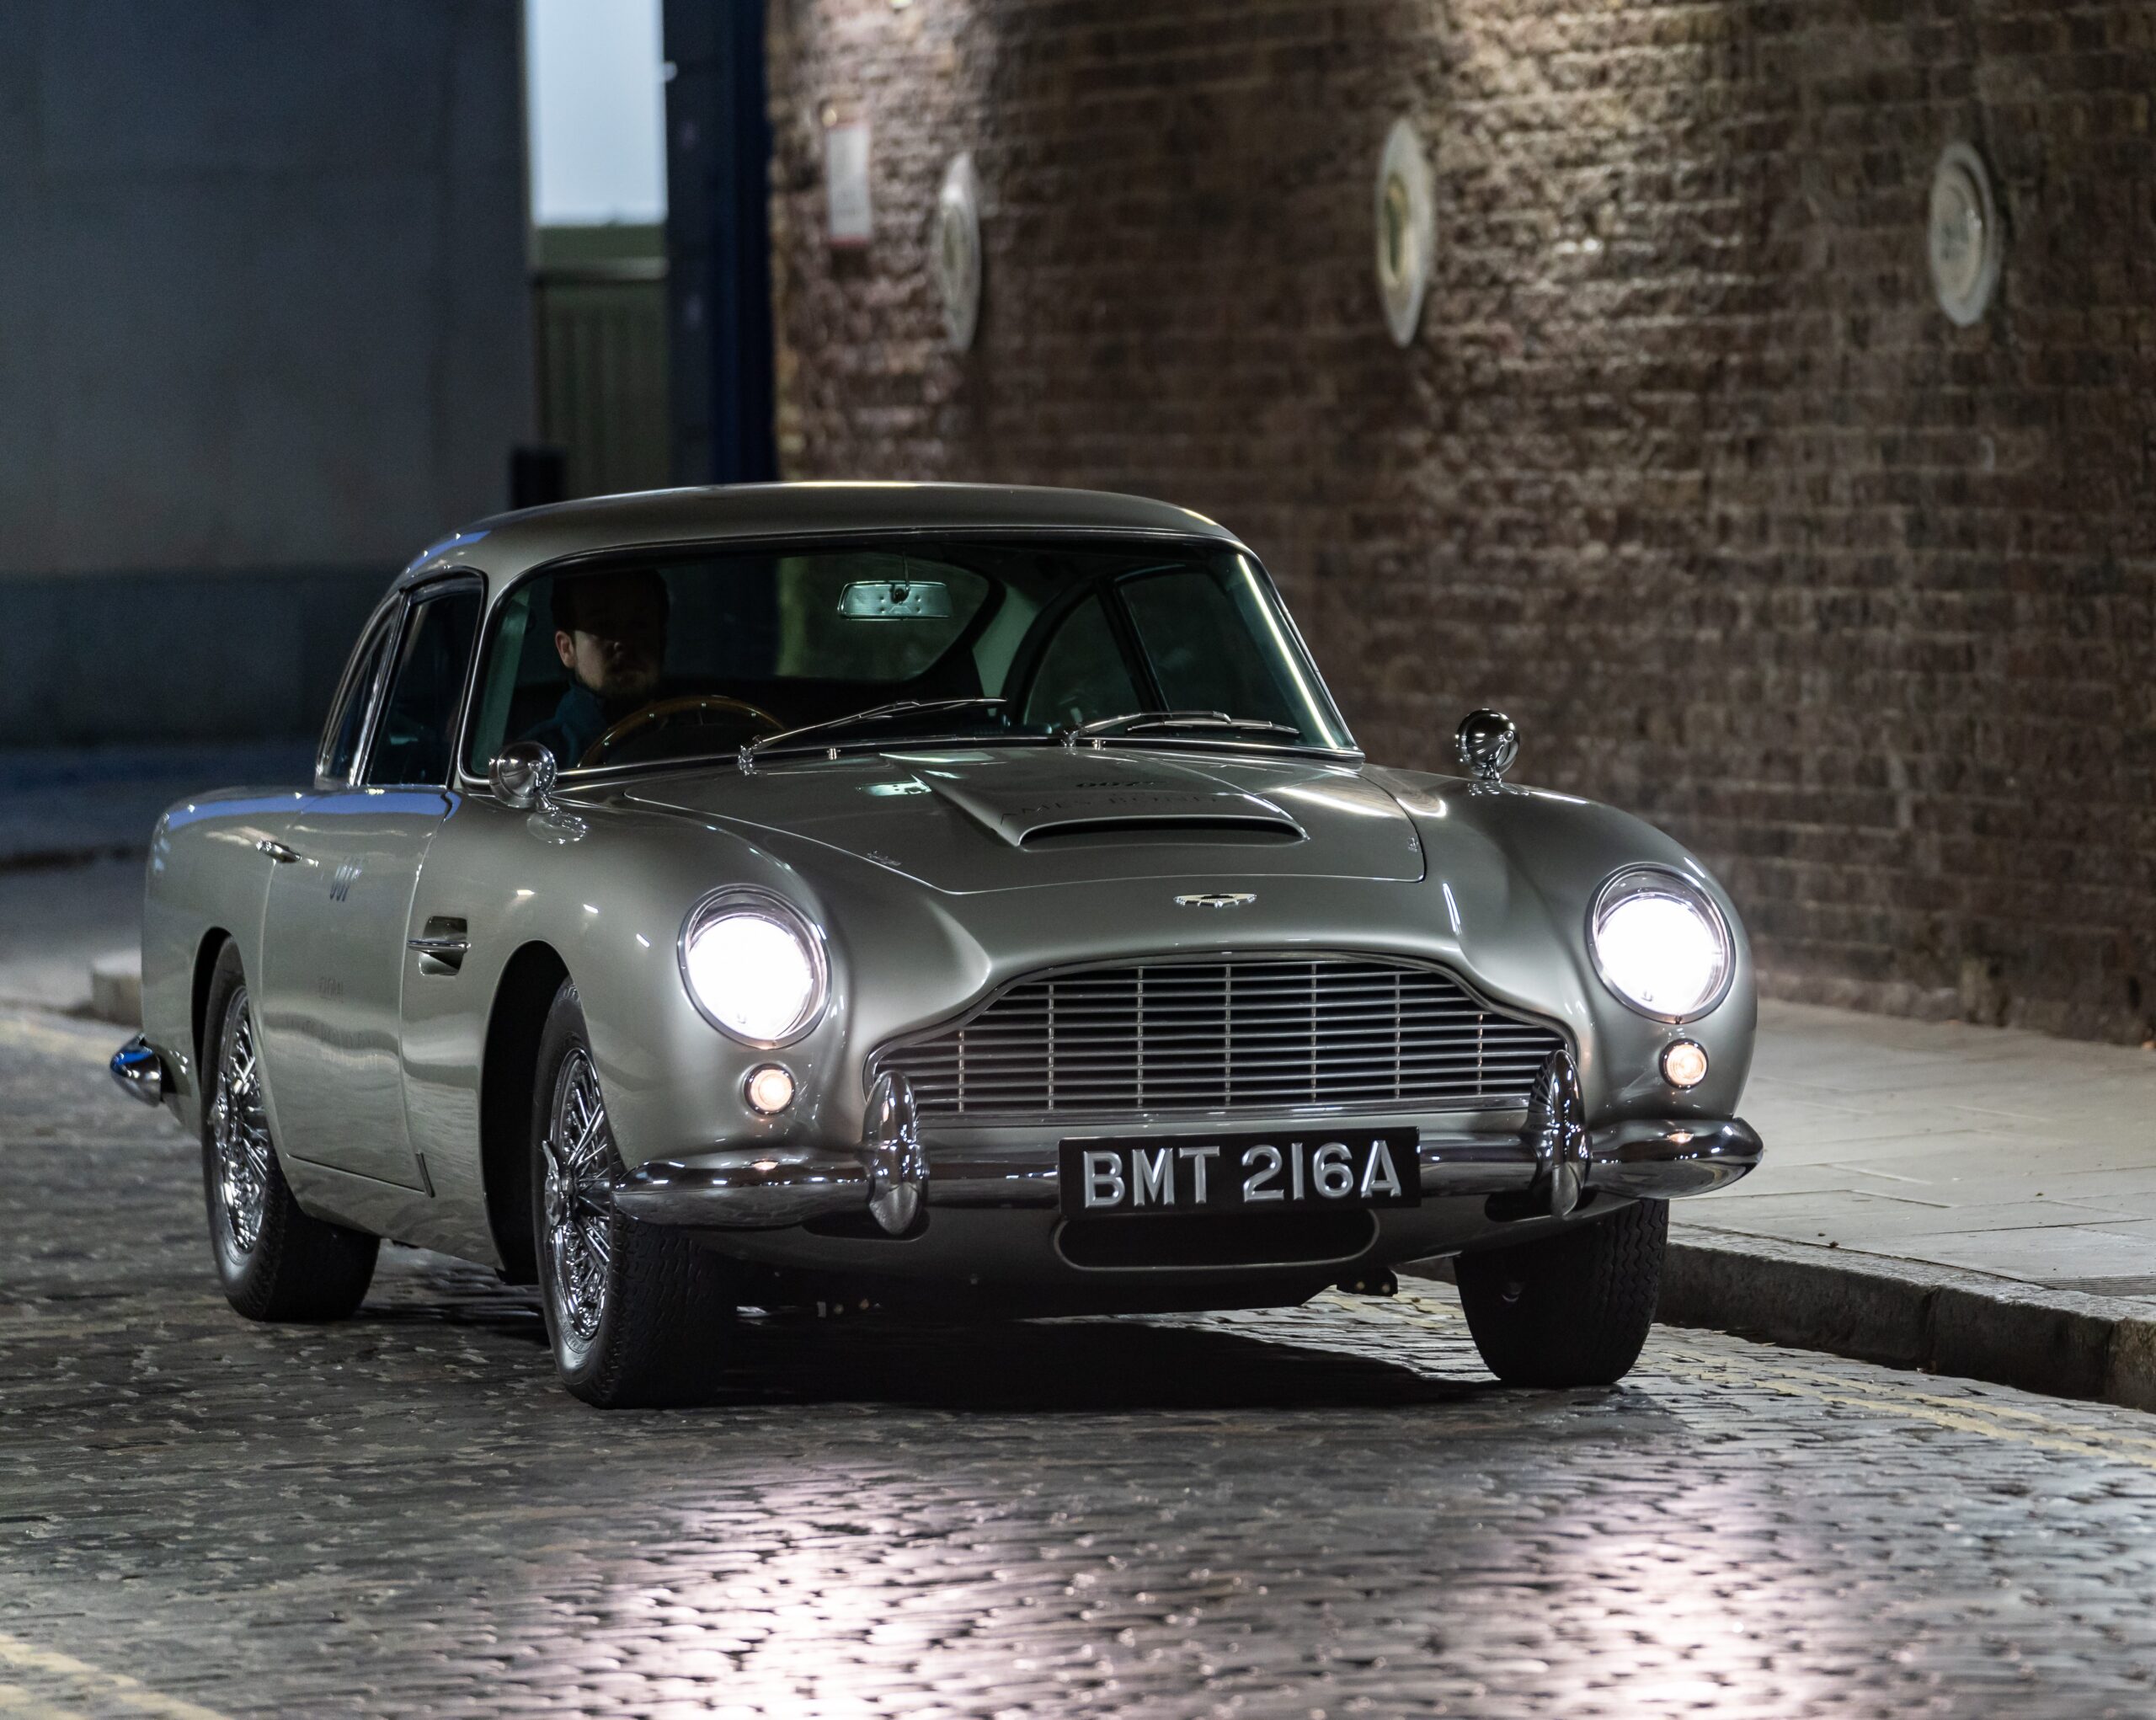 The Aston Martin DB5 at 60 – Celebrating six decades of the